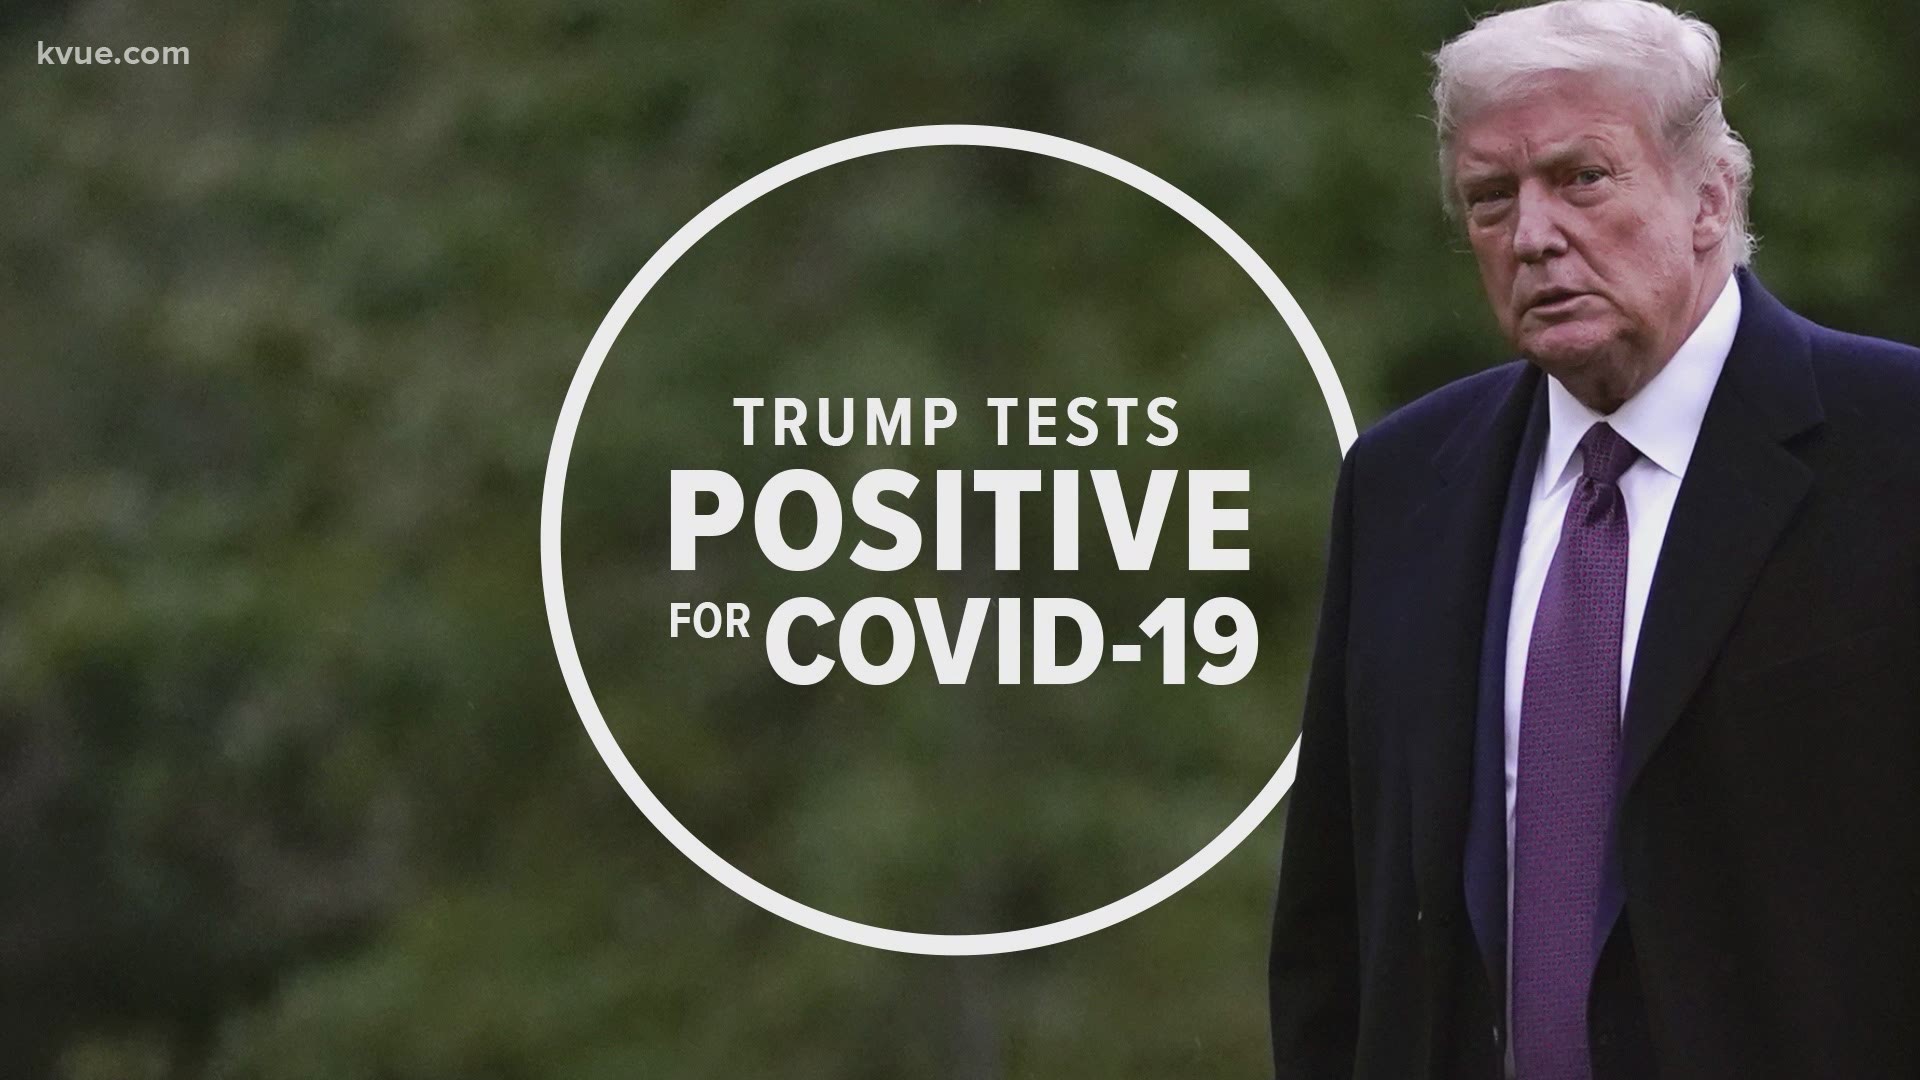 President Donald Trump and First Lady Melania Trump tested positive for coronavirus.